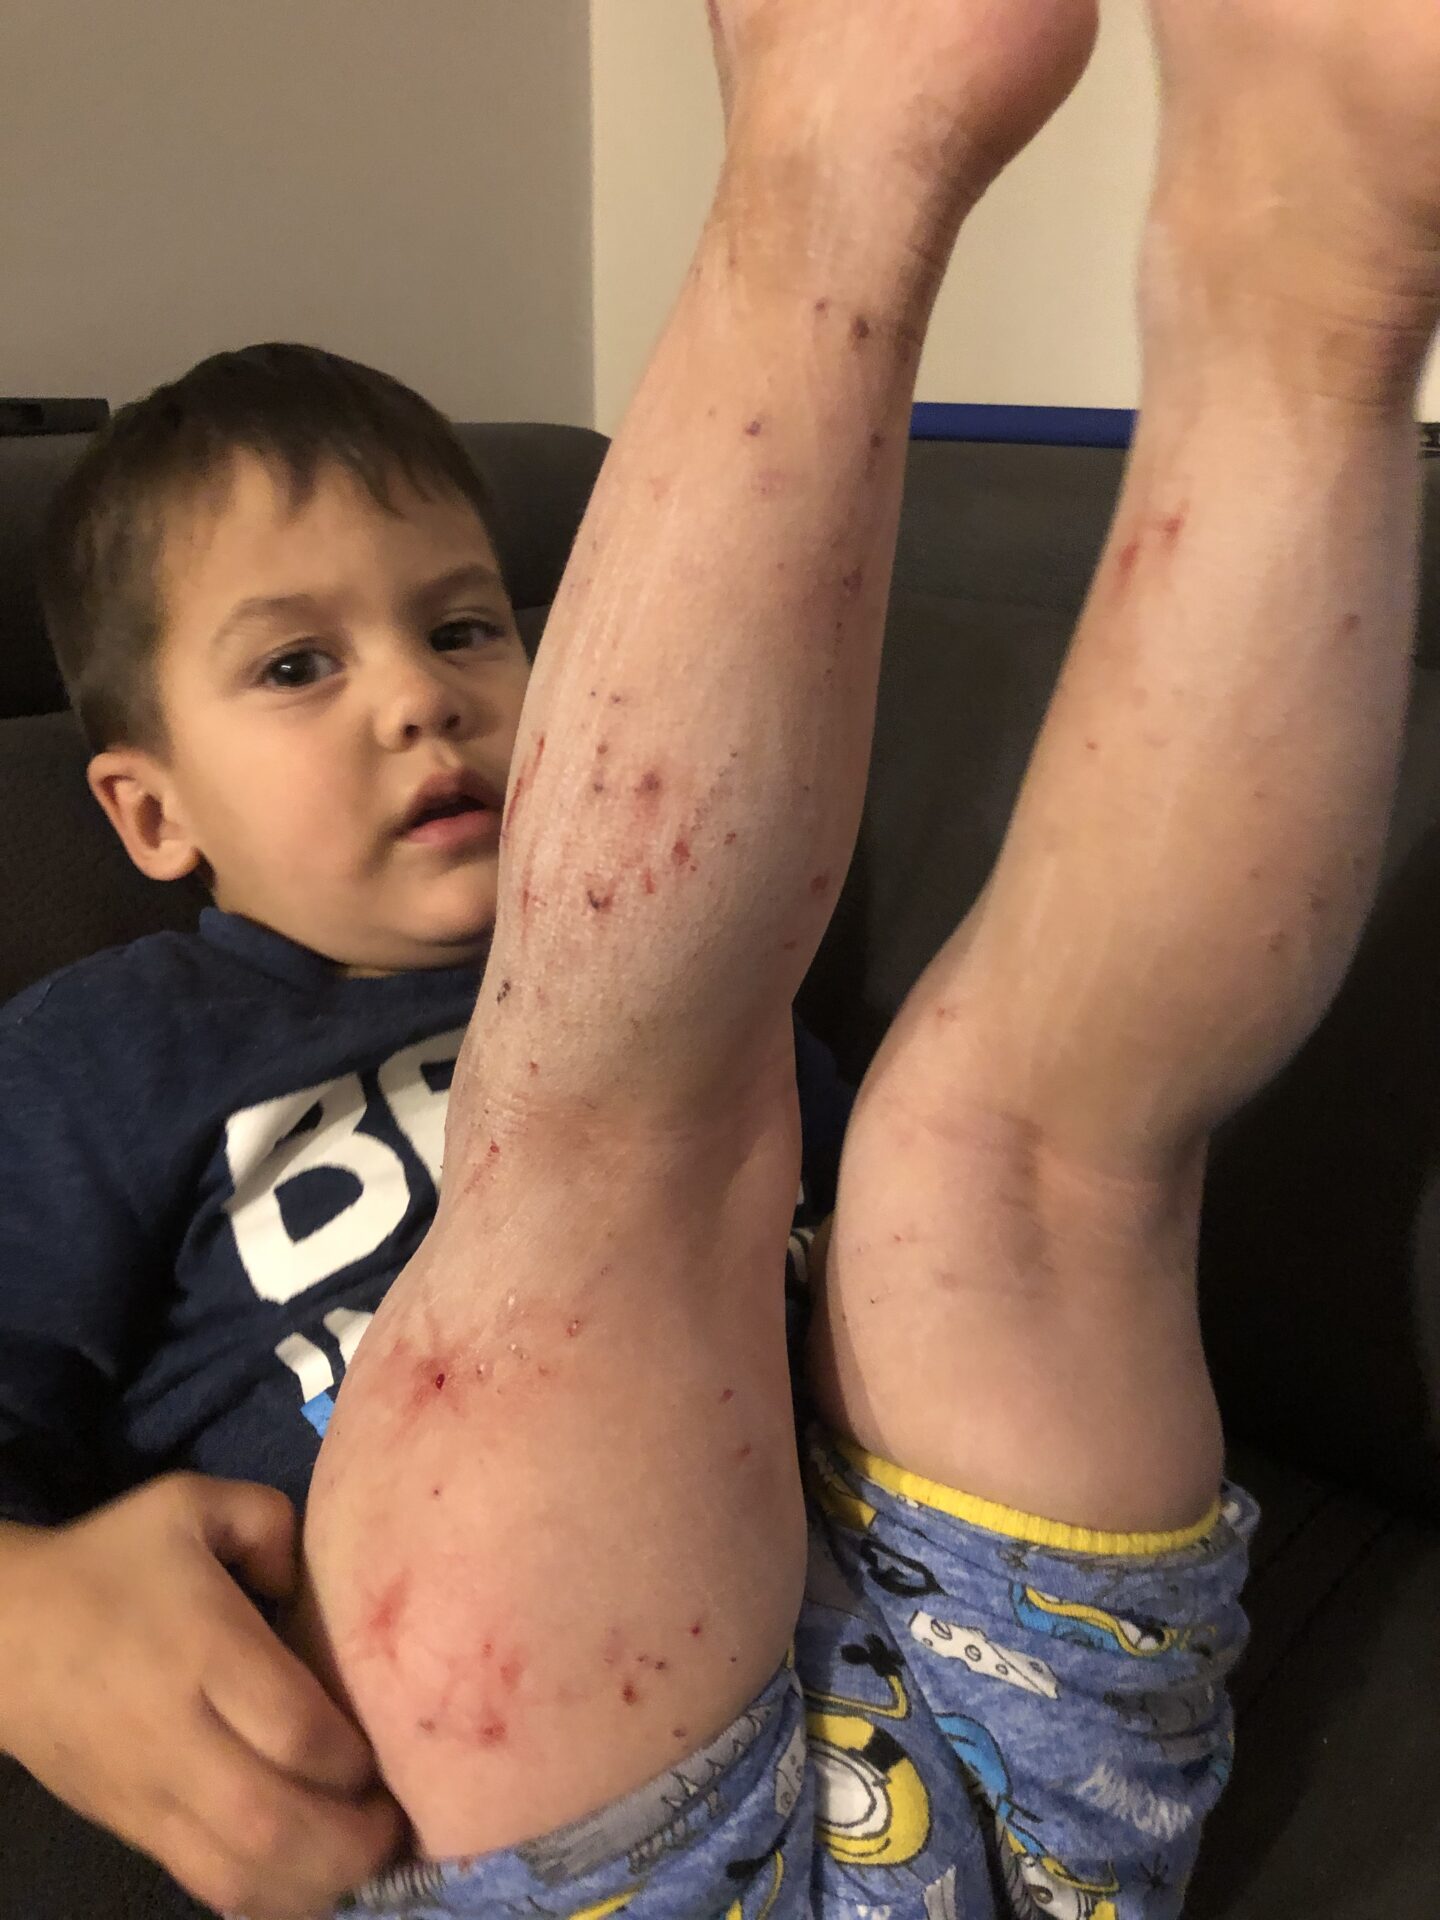 photo of a young boy with wounds from chronic itch